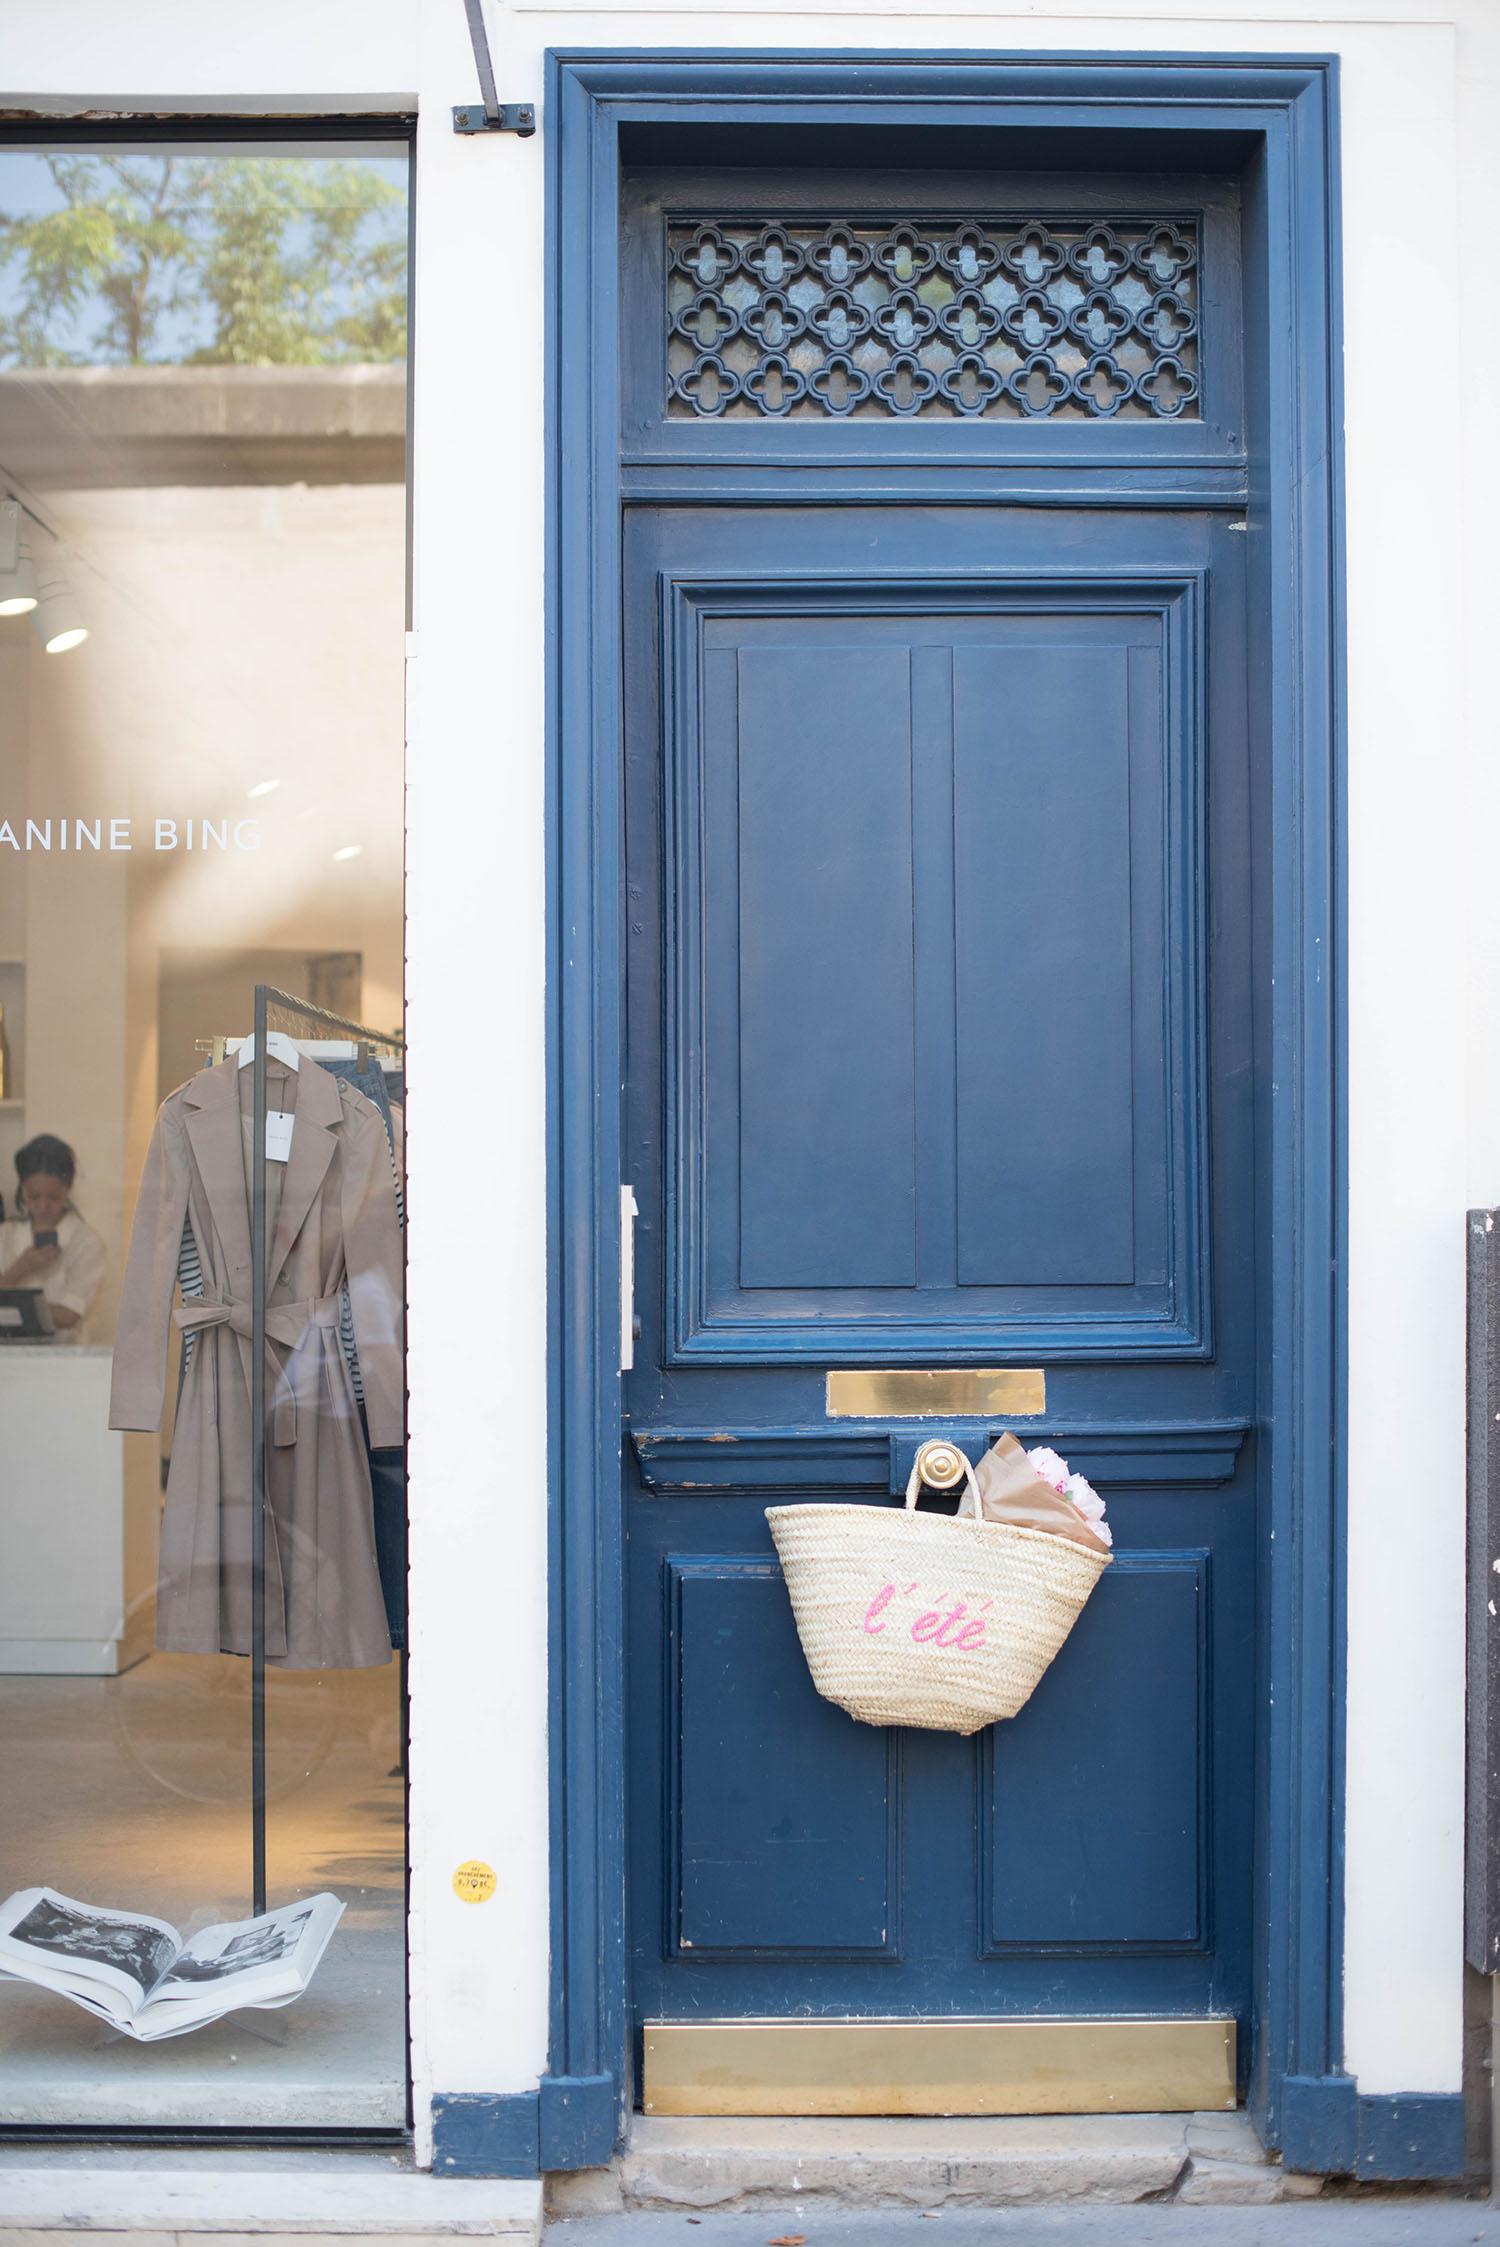 A Sezane straw tote full of pink peonies hangs on a blue door in le Marais, captured by travel blogger Cee Fardoe of Coco & Vera